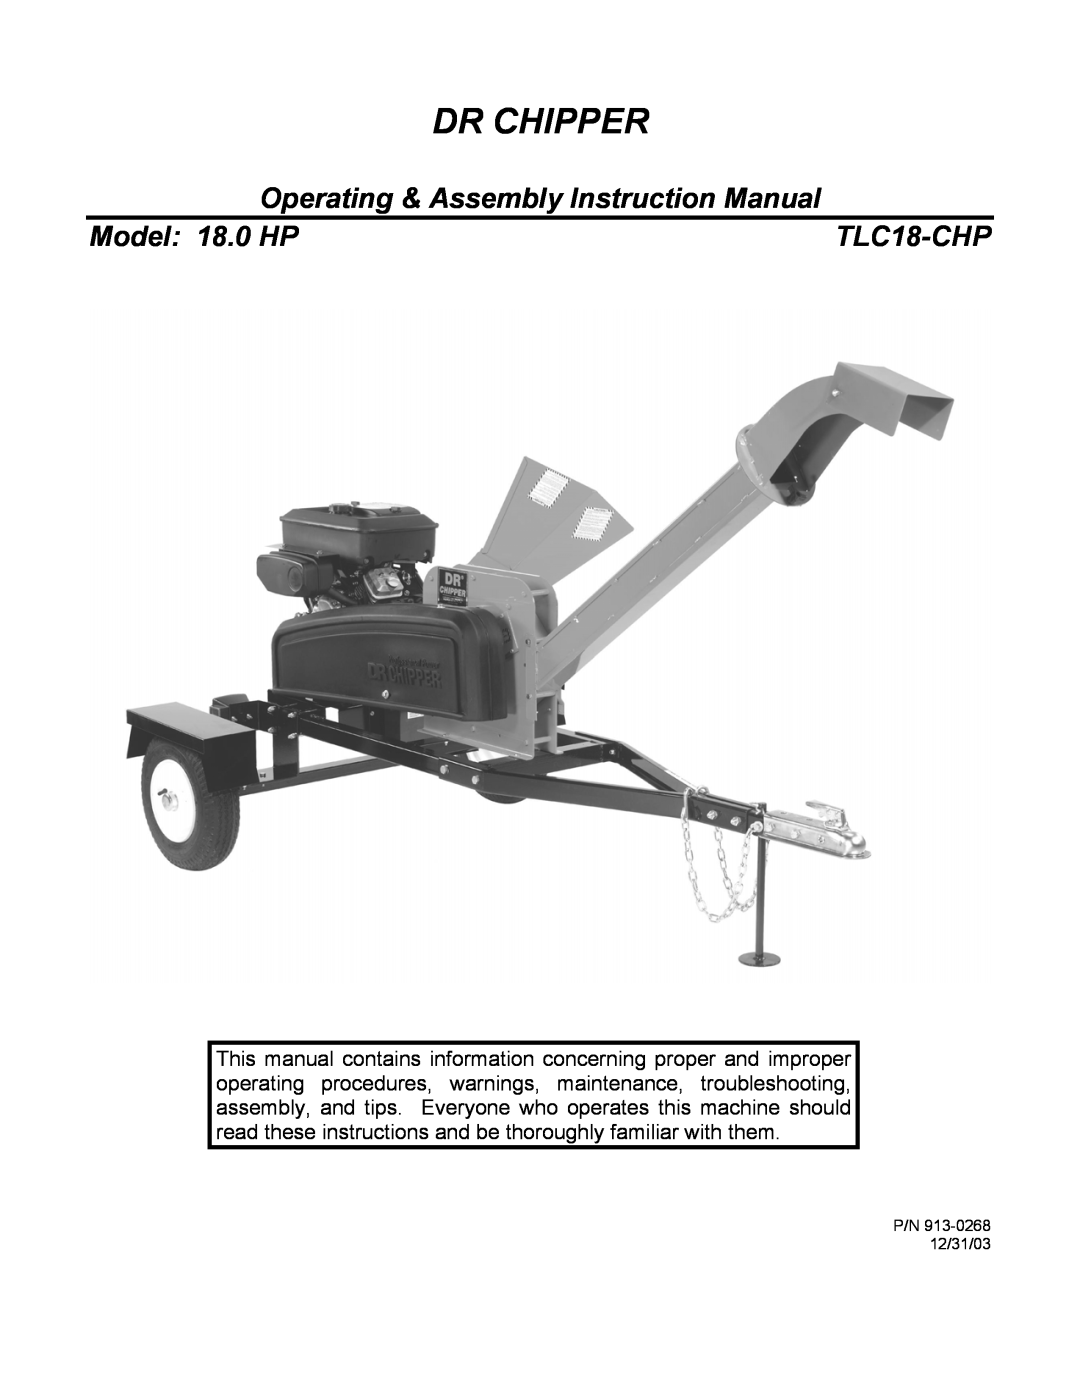 Country Home Products TLC18-CHP instruction manual Dr Chipper, Model 18.0 HP, P/N 913-026812/31/03 